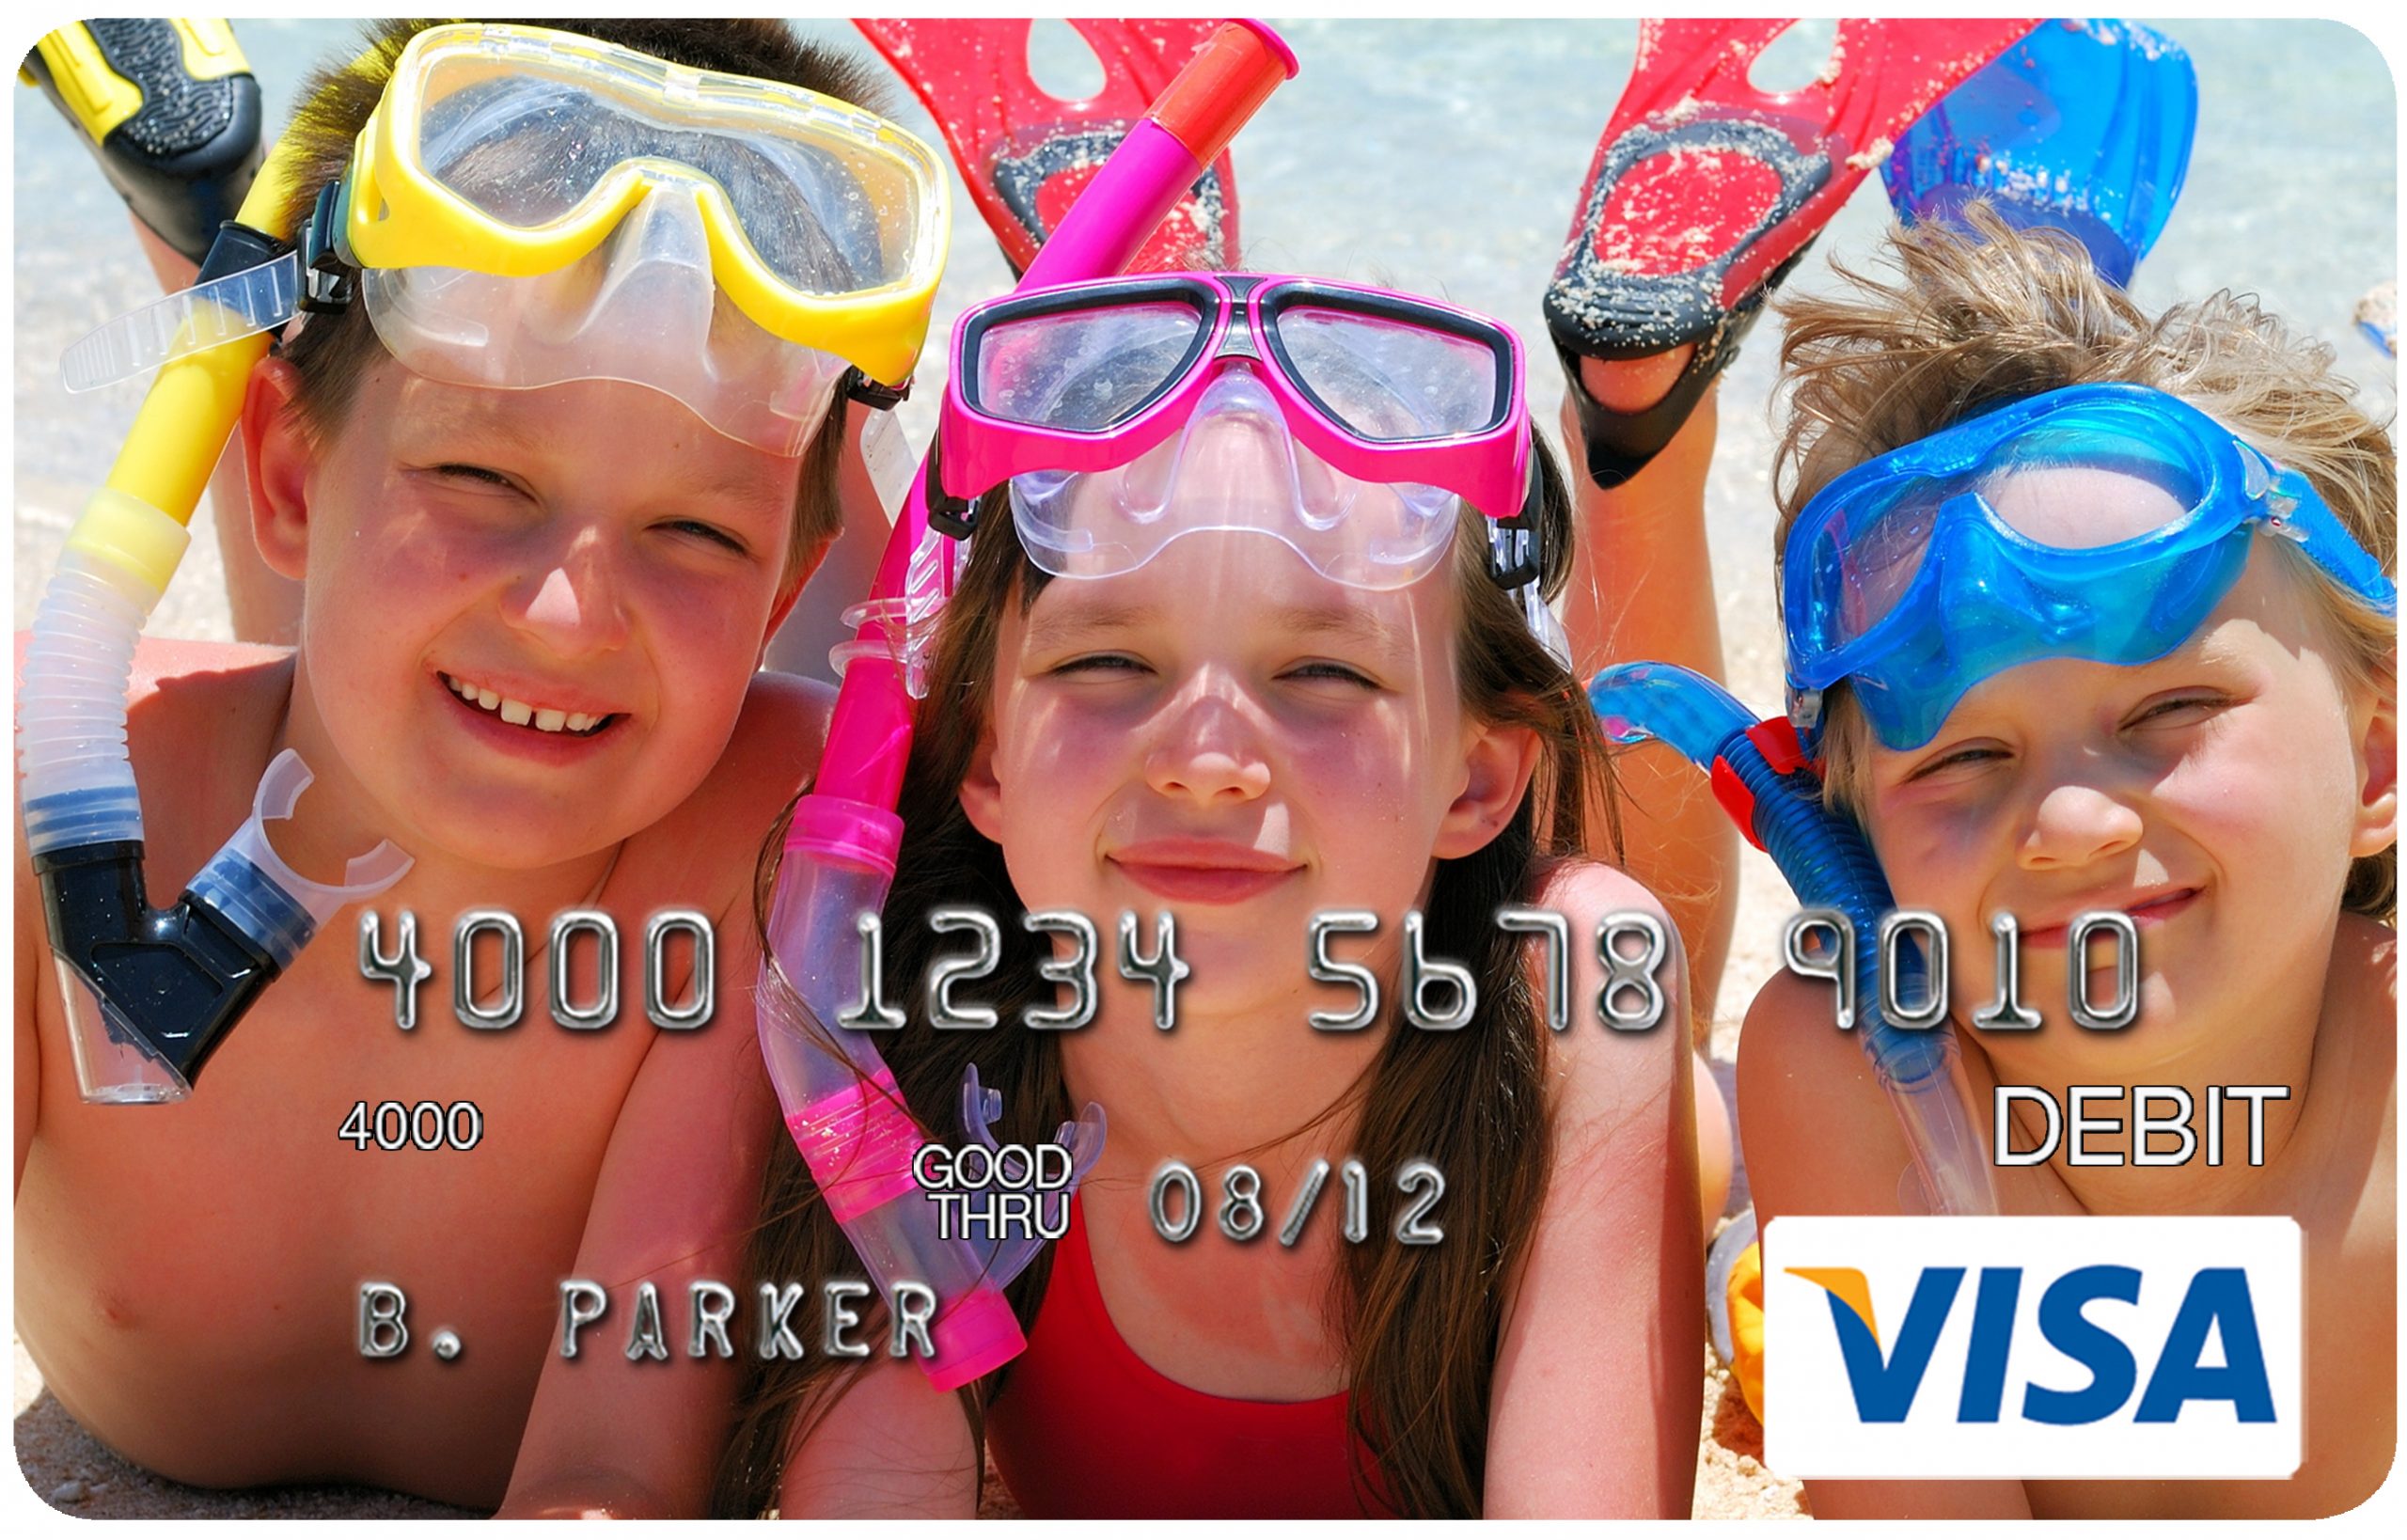 personalize your credit card